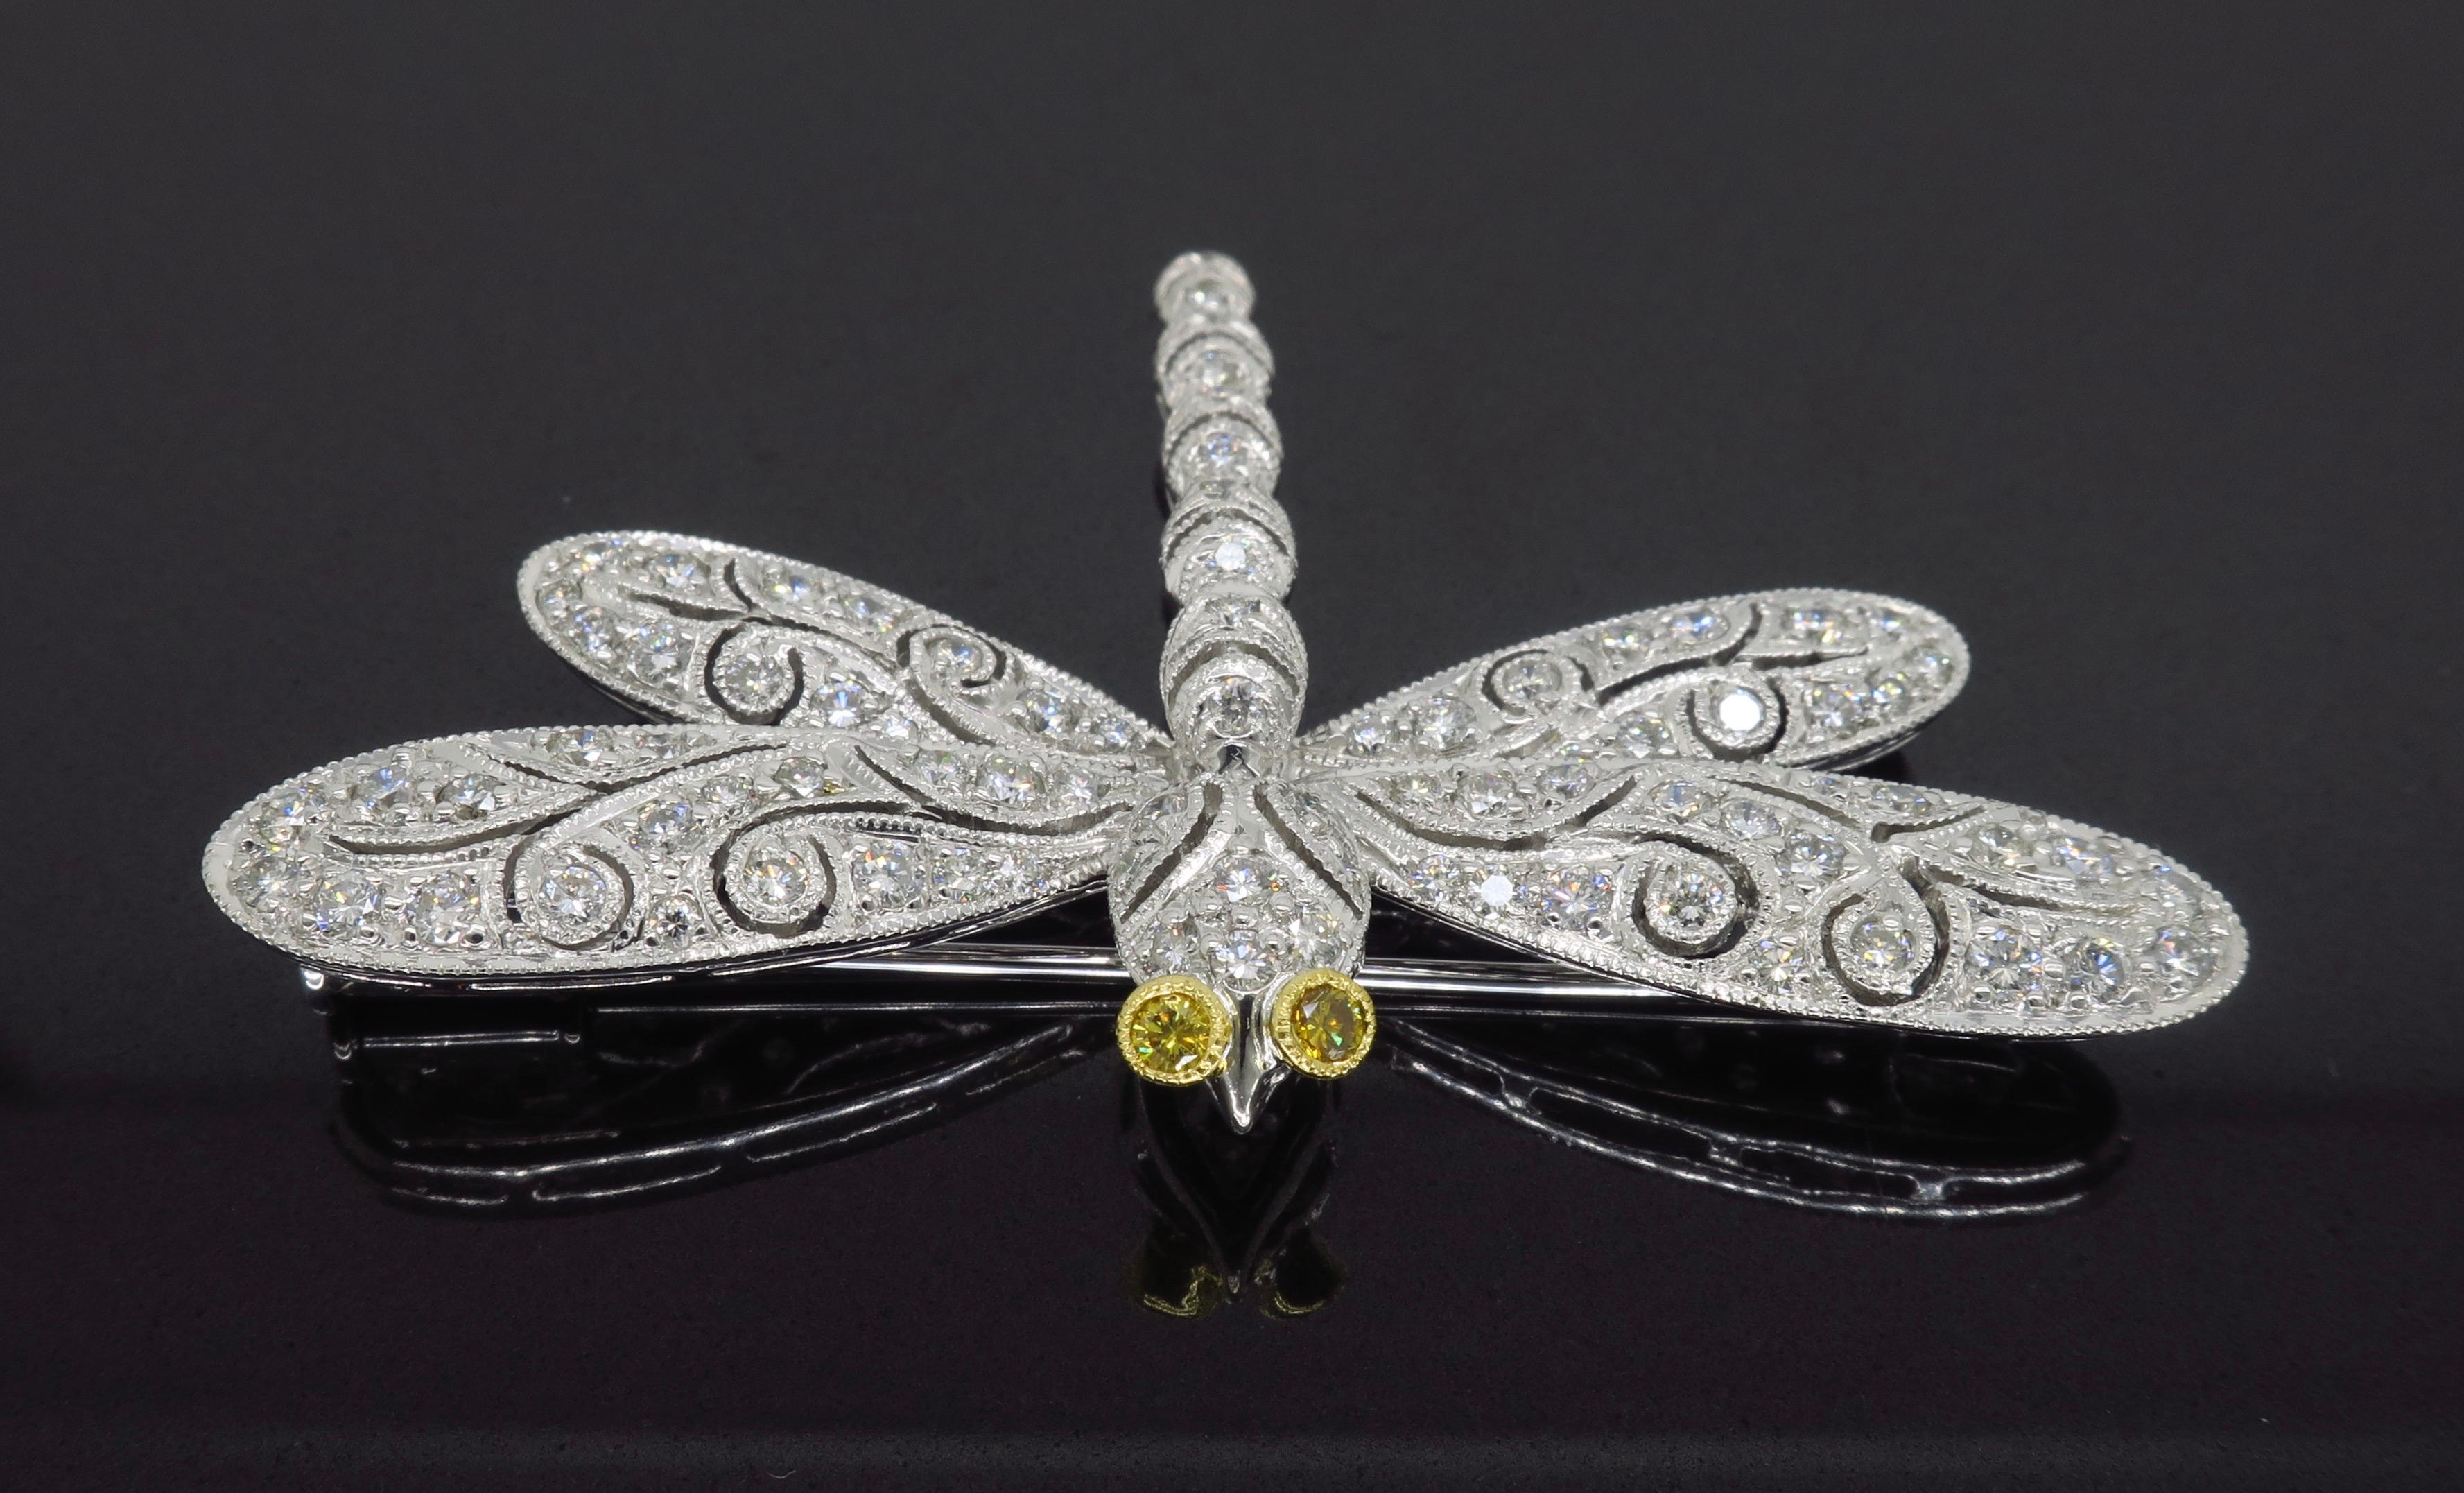 Ornate fire fly diamond brooch crafted in 18k white gold. 

Diamond Carat Weight: Approximately 1.30CTW
Diamond Cut: Round Brilliant Cut Diamonds
Color: Average G-J and Two Yellow Diamond Eyes
Clarity: Average VS-I
Metal: 18K White Gold